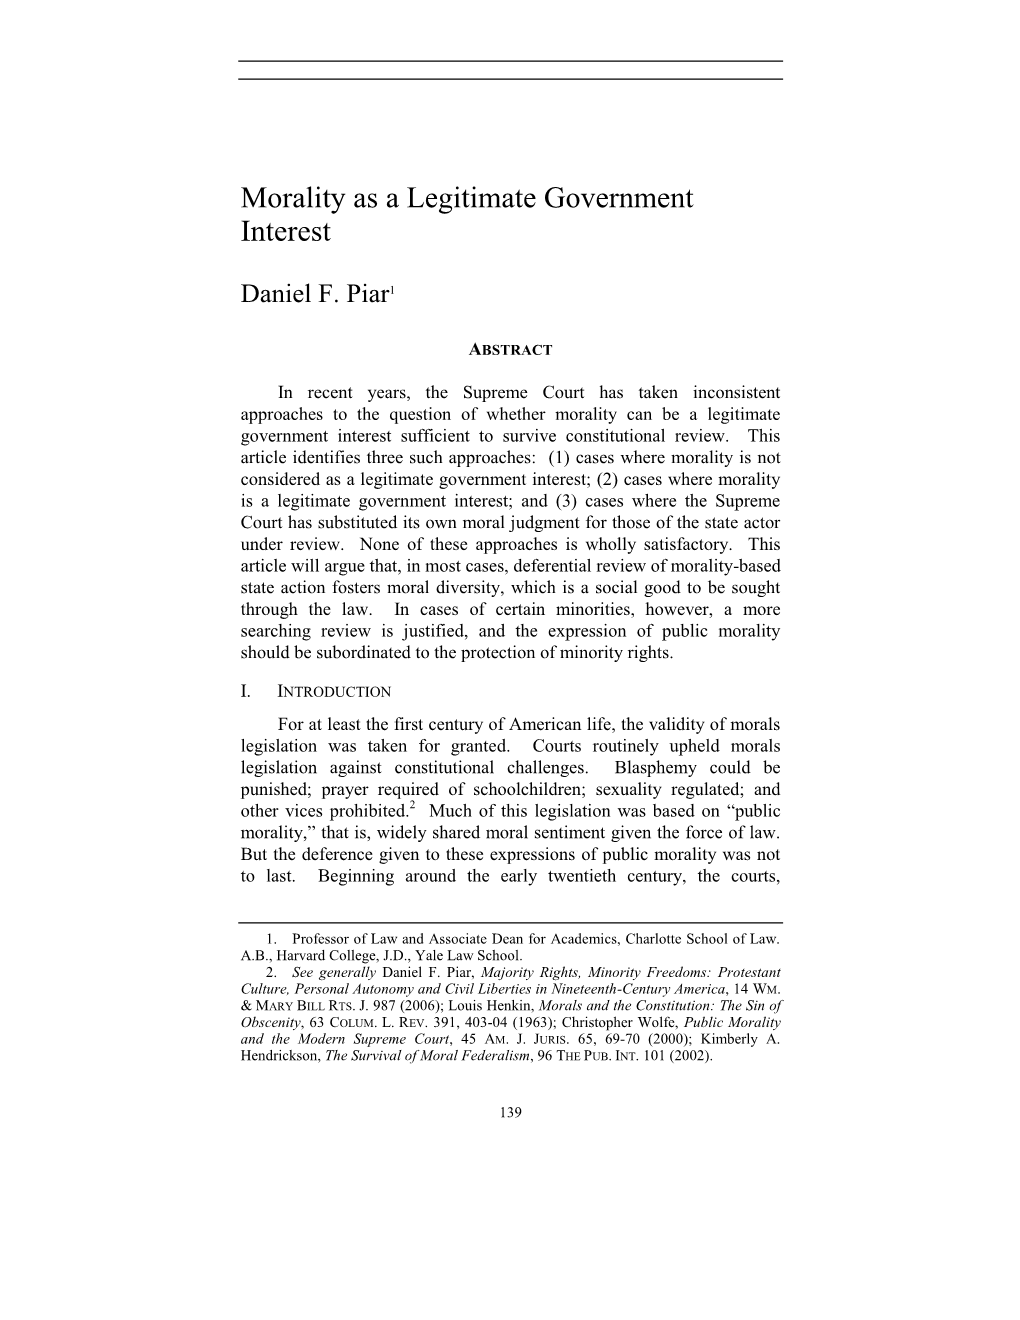 Morality As a Legitimate Government Interest